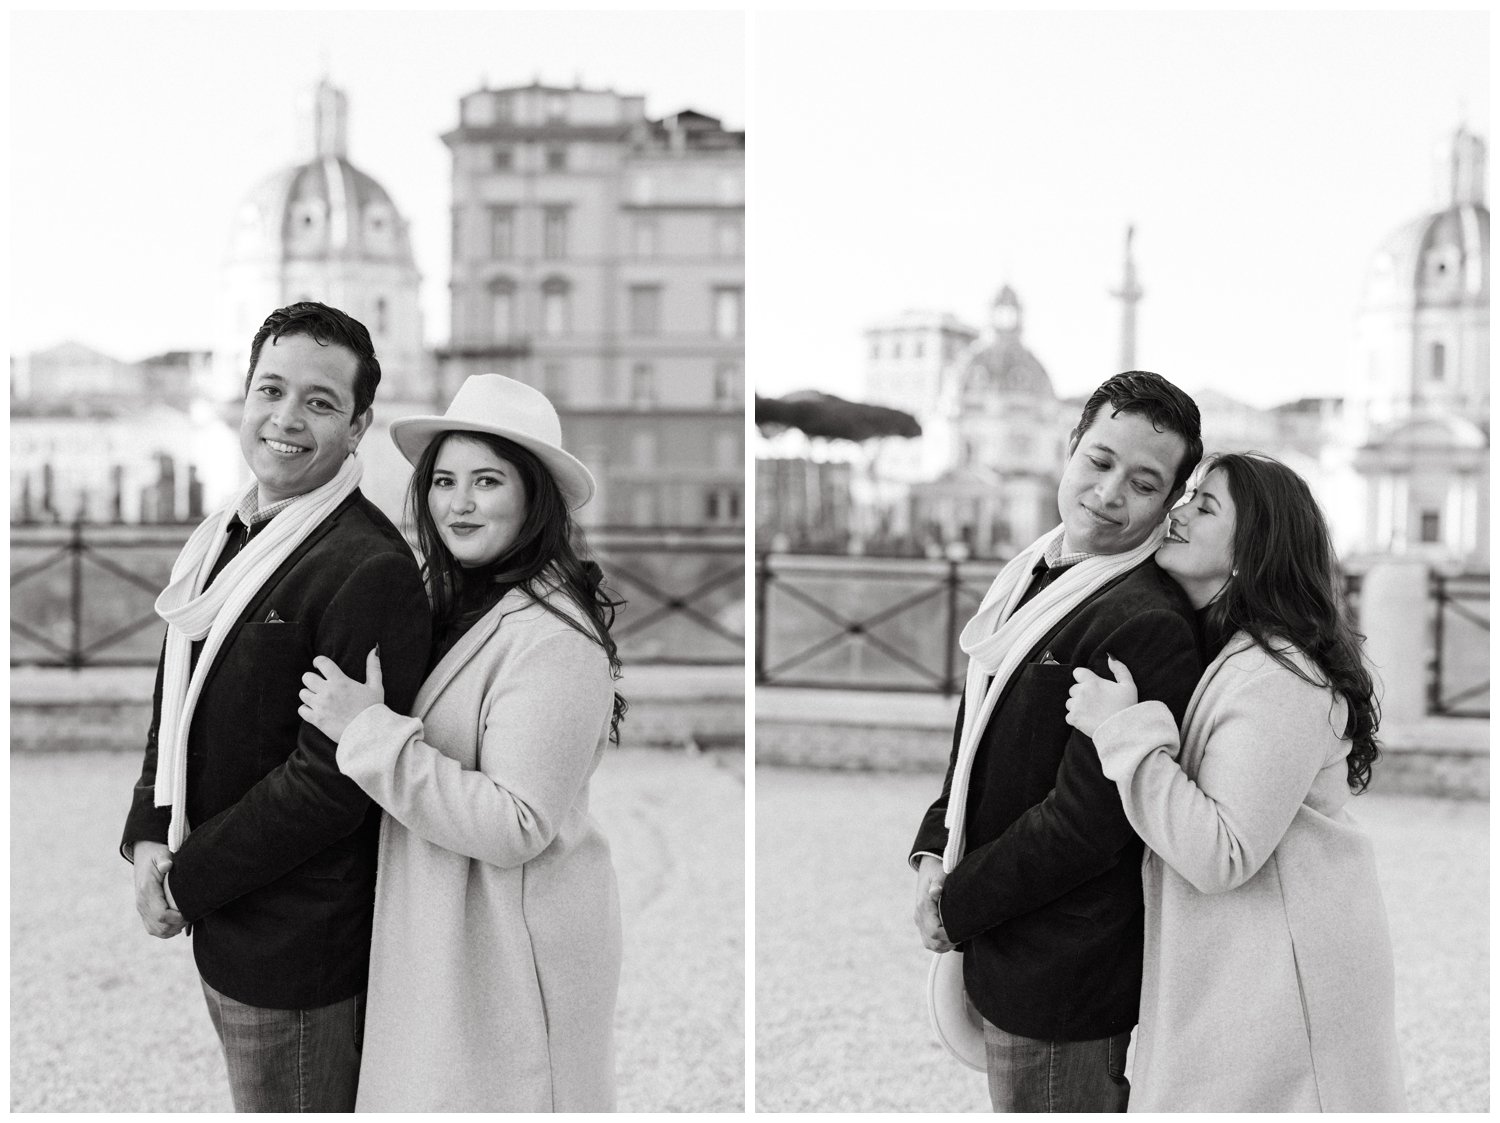 The couple cuddles in Rome for the wedding photographer in Italy